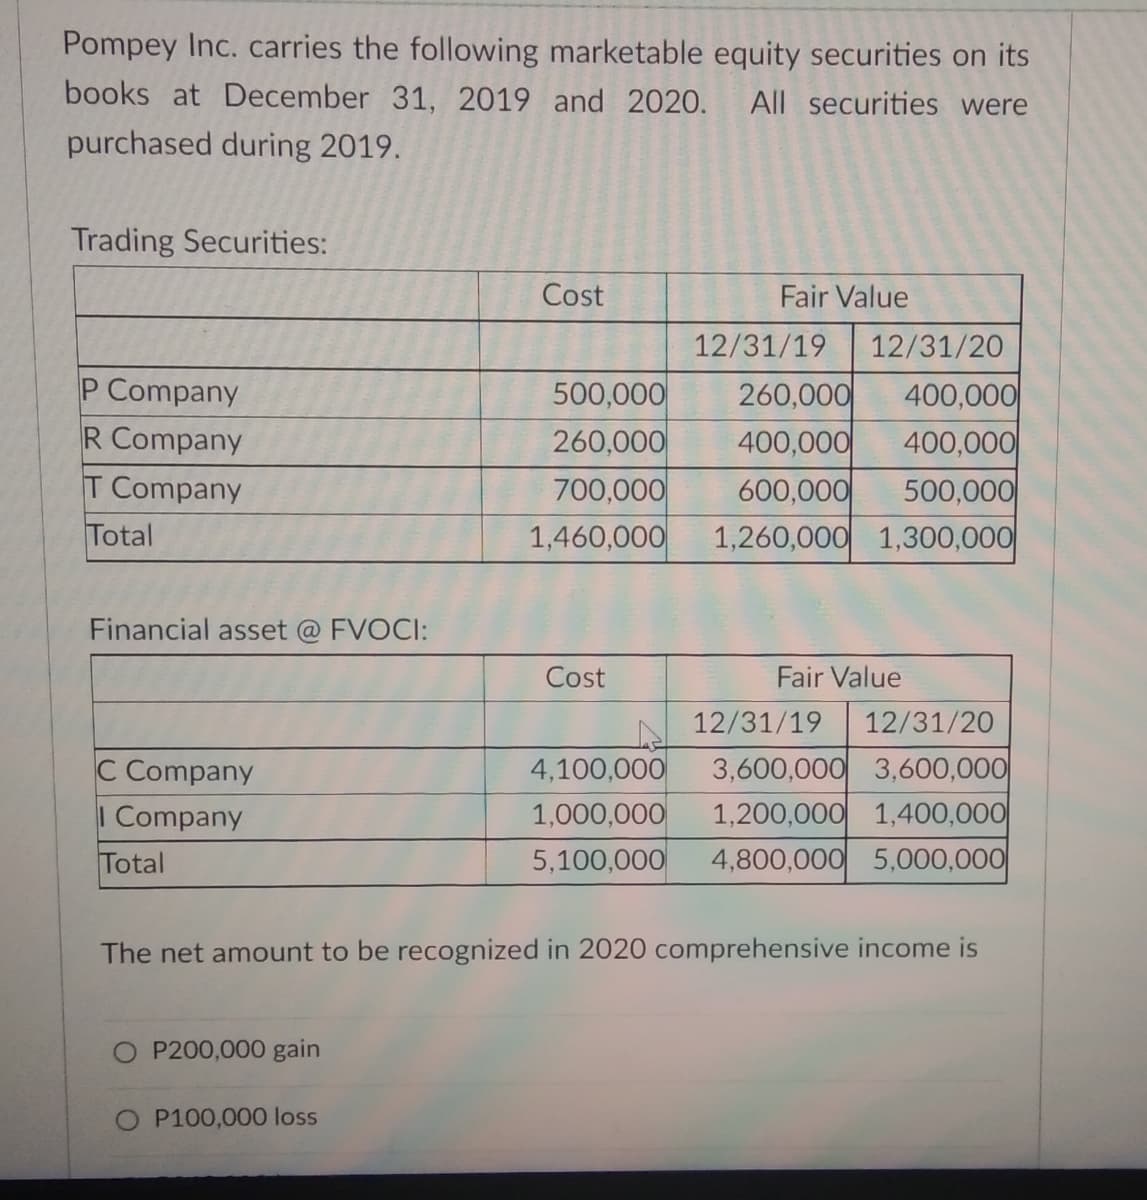 Pompey Inc. carries the following marketable equity securities on its
books at December 31, 2019 and 2020.
All securities were
purchased during 2019.
Trading Securities:
Cost
Fair Value
12/31/19
12/31/20
P Company
R Company
T Company
500,000
260,000
700,000
1,460,000
260,000
400,000
400,000
400,000
600,000
500,000
1,260,000 1,300,000
Total
Financial asset @ FVOCI:
Cost
Fair Value
12/31/19
12/31/20
3,600,000 3,600,000
1,200,000 1,400,000
4,800,000 5,000,000
4,100,000
C Company
I Company
Total
1,000,000
5,100,000
The net amount to be recognized in 2020 comprehensive income is
O P200,000 gain
P100,000 loss
